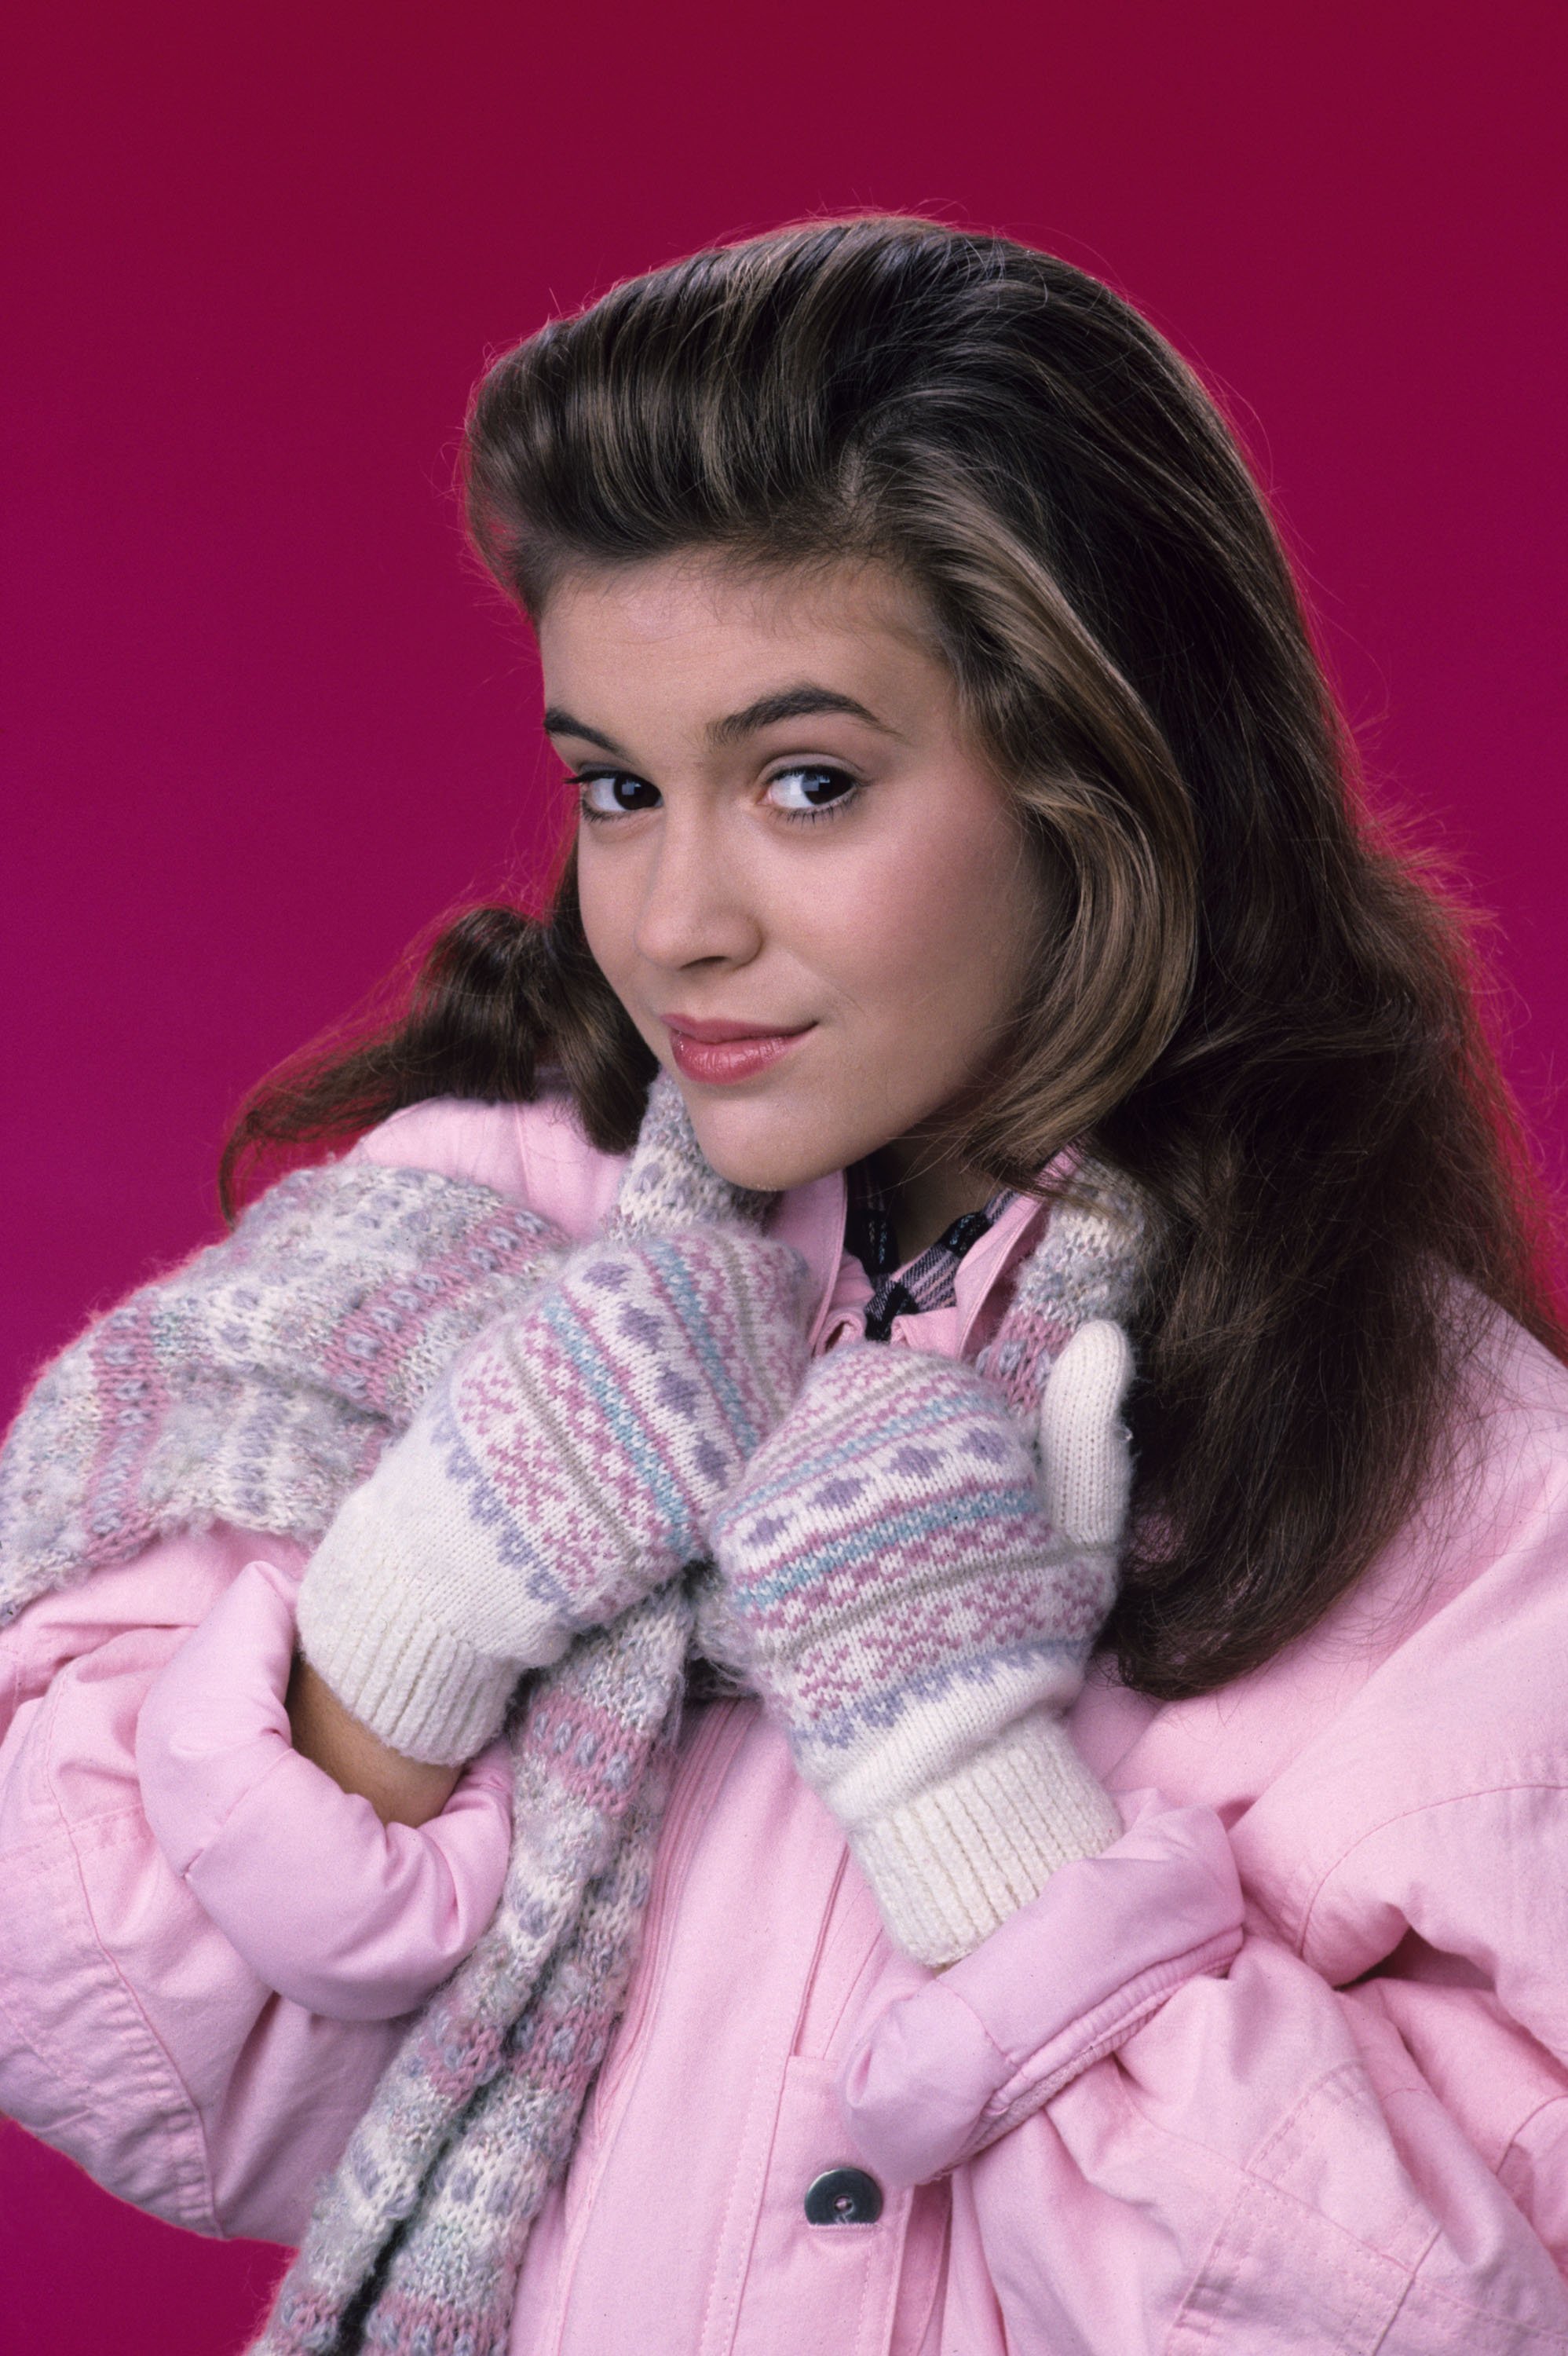 WHO'S THE BOSS ? - Gallery - Season Four - 11/10/87, Alyssa Milano (Samantha) | Photo: GettyImages